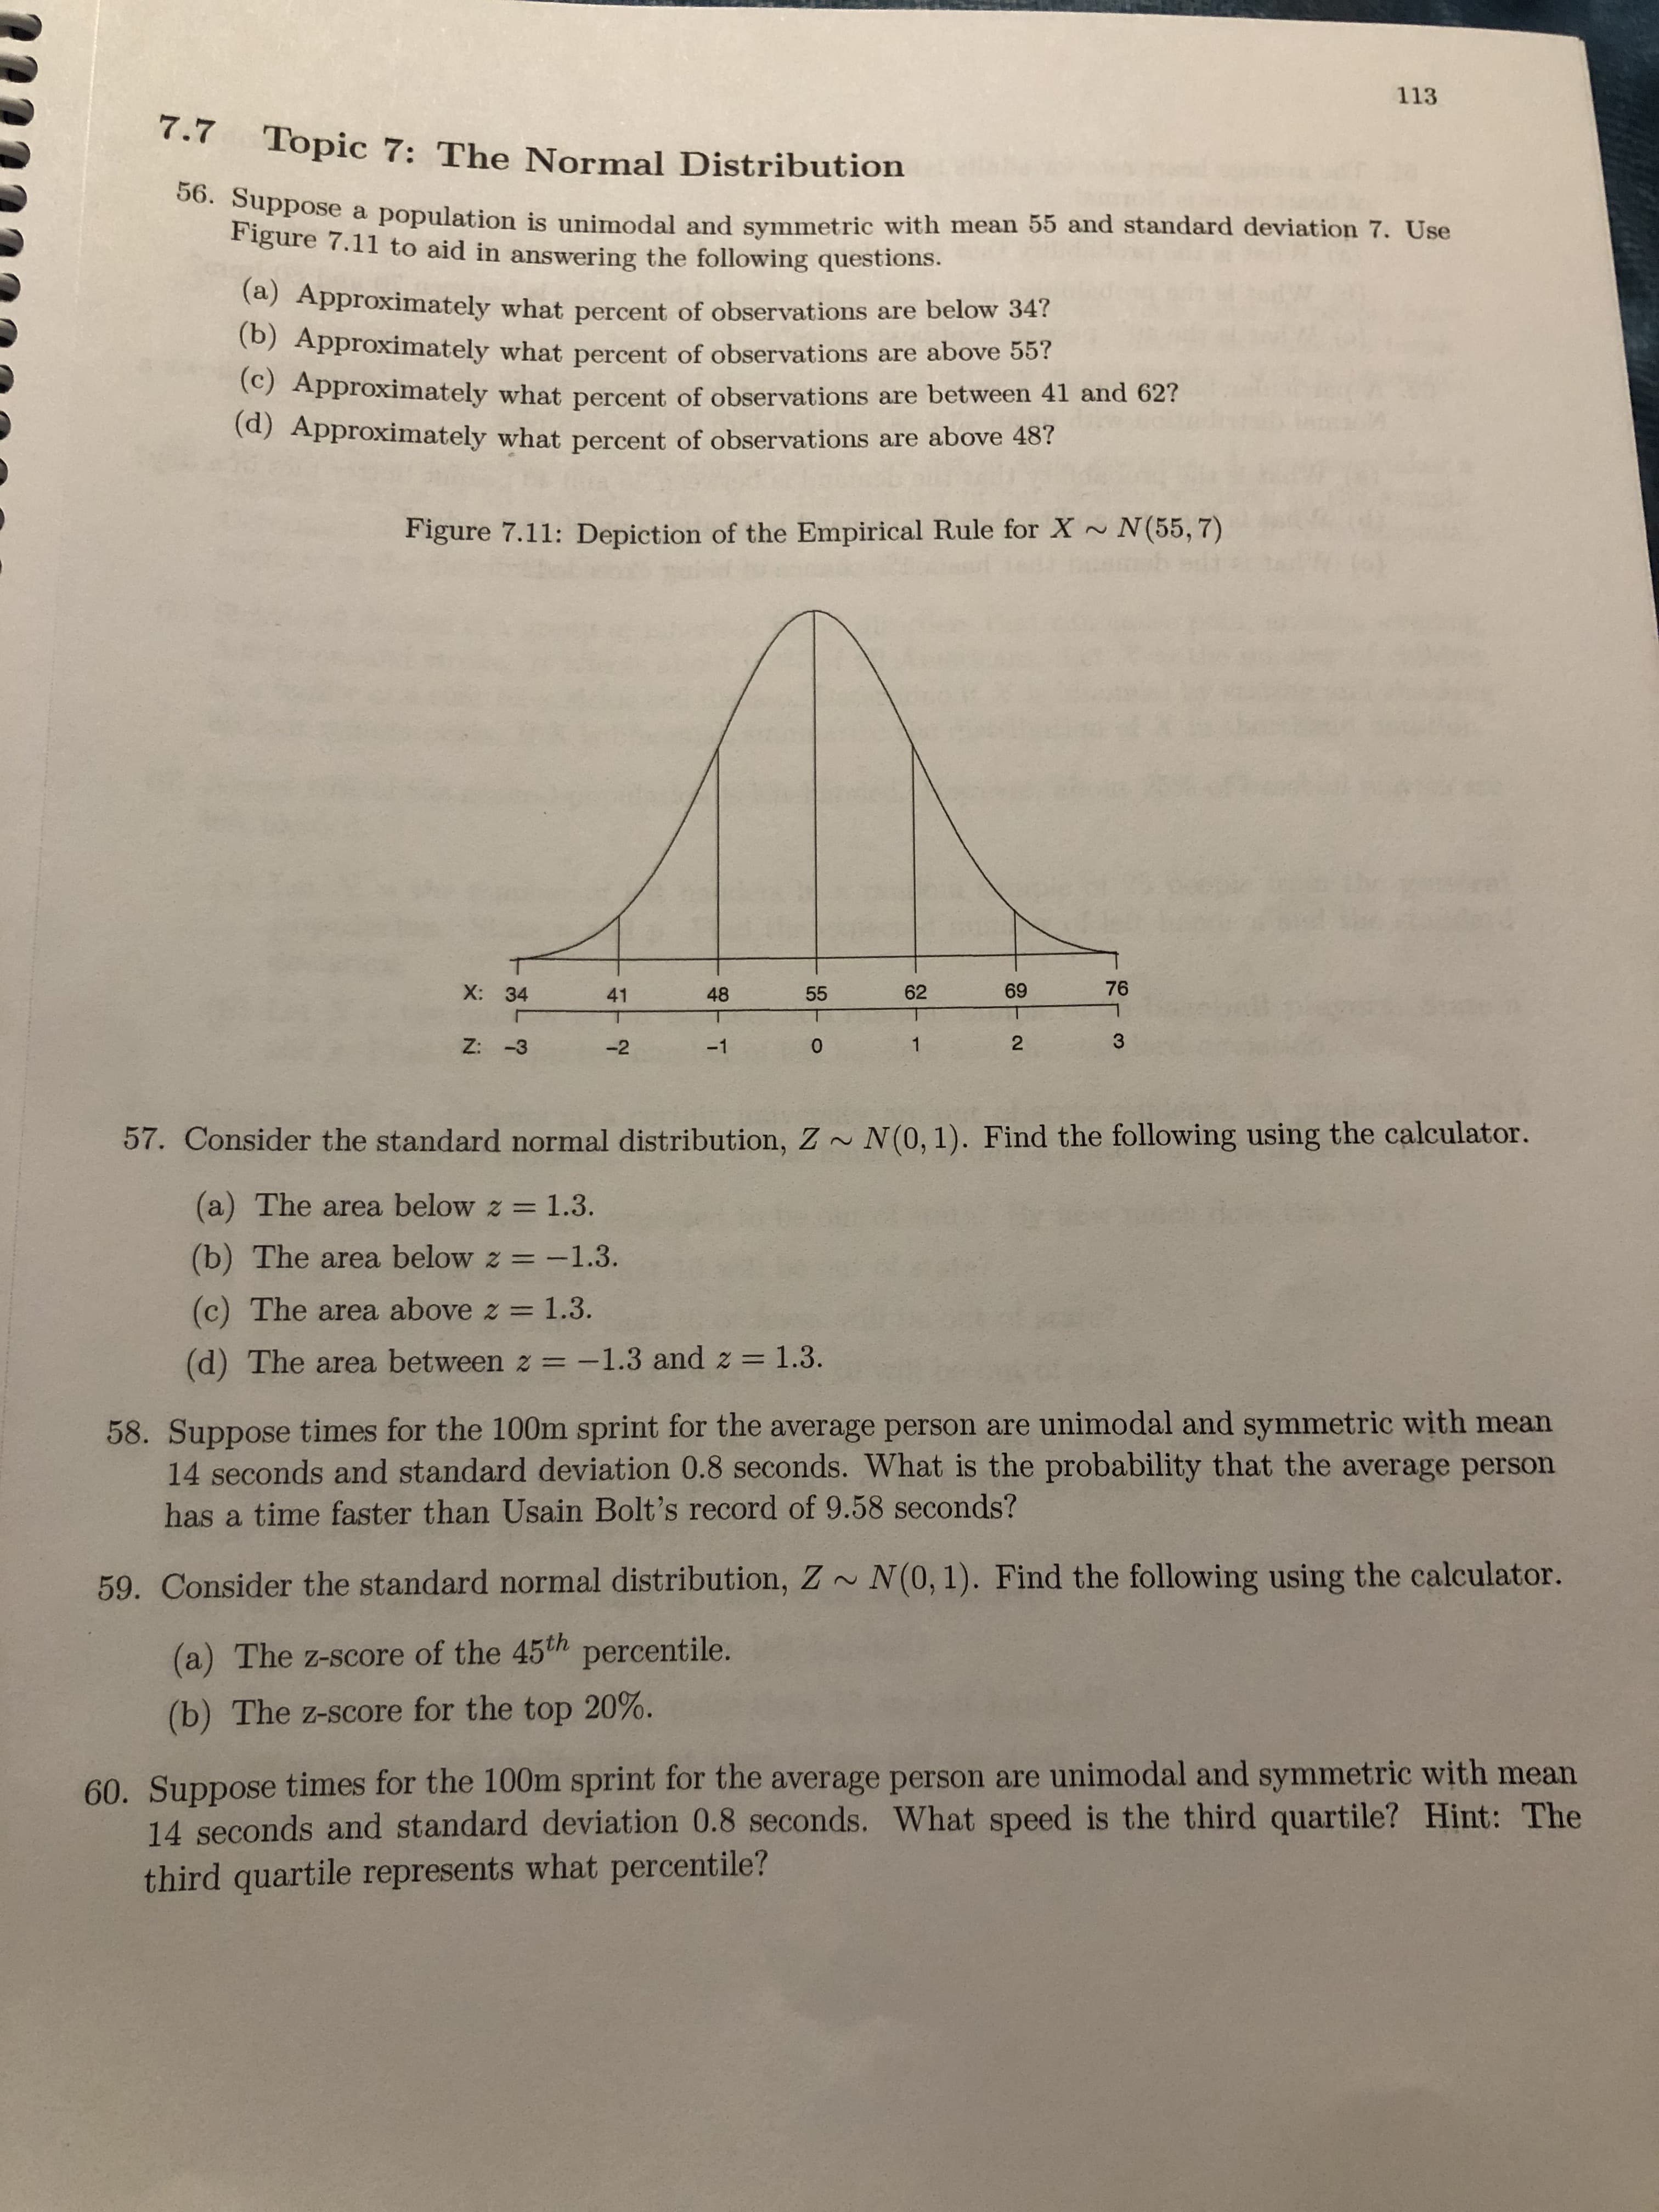 113
7.7 Topic 7: The Normal Distribution
Suppose a population is unimodal and symmetric with mean 55 and standard deviation 7. Use
Figure 7.11 to aid in answering the following questions.
(a) Approximately what percent of observations are below 34?
(b) Approximately what percent of observations are above 55?
(C) Approximately what percent of observations are between 41 and 62?
(d) Approximately what percent of observations are above 48?
Figure 7.11: Depiction of the Empirical Rule for X~ N(55, 7)
X: 34
41
48
55
62
69
76
Z: -3
-2
-1
2
57. Consider the standard normal distribution, Z~ N(0, 1). Find the following using the calculator.
(a) The area below z = 1.3.
%3D
(b) The area below z = -1.3.
%3D
(c) The area above z = 1.3.
(d) The area between z = -1.3 and z = 1.3.
58. Suppose times for the 100m sprint for the average person are unimodal and symmetric with mean
14 seconds and standard deviation 0.8 seconds. What is the probability that the average person
has a time faster than Usain Bolt's record of 9.58 seconds?
59. Consider the standard normal distribution, Z~ N(0, 1). Find the following using the calculator.
(a) The z-score of the 45th percentile.
(b) The z-score for the top 20%.
60. Suppose times for the 100m sprint for the average person are unimodal and symmetric with mean
14 seconds and standard deviation 0.8 seconds. What speed is the third quartile? Hint: The
third quartile represents what percentile?
